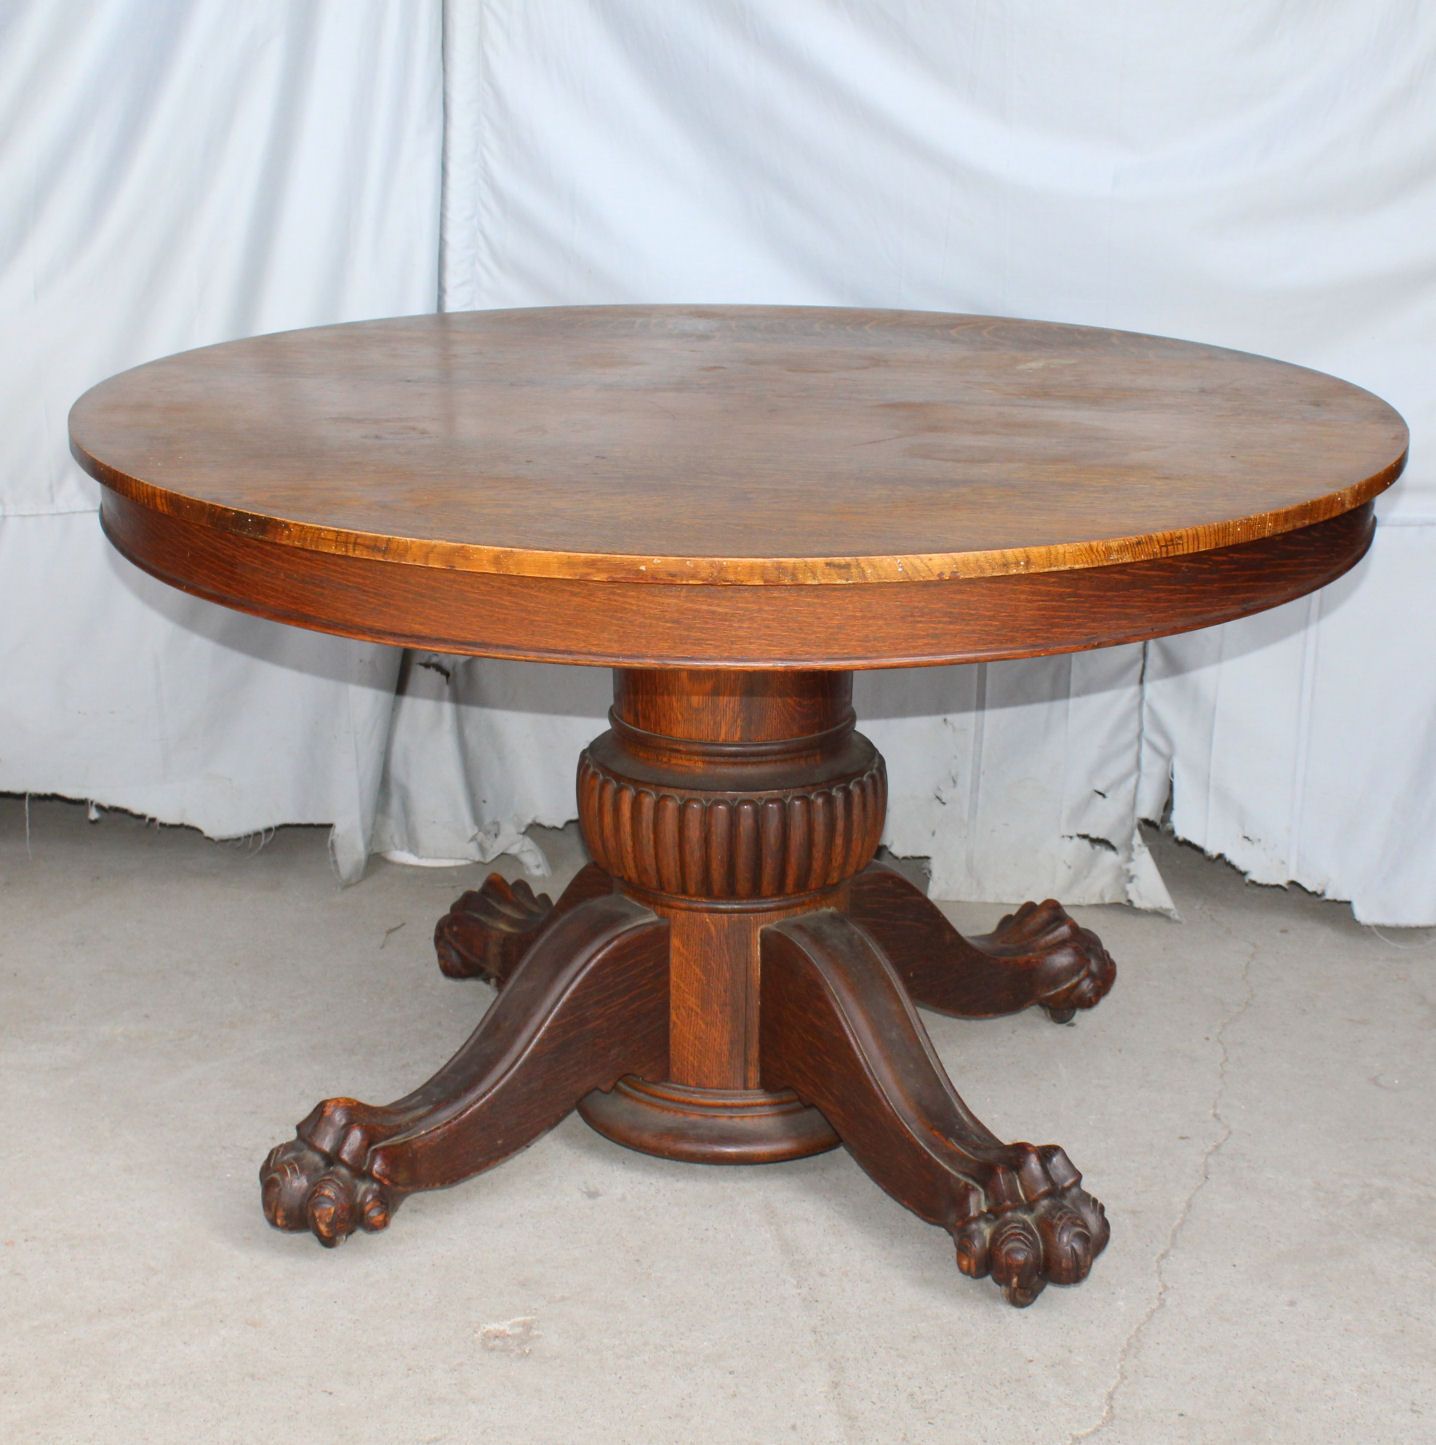 Bargain John'S Antiques | Antique Round Oak Dining Table Intended For Most Popular Reclaimed Teak And Cast Iron Round Dining Tables (View 1 of 15)